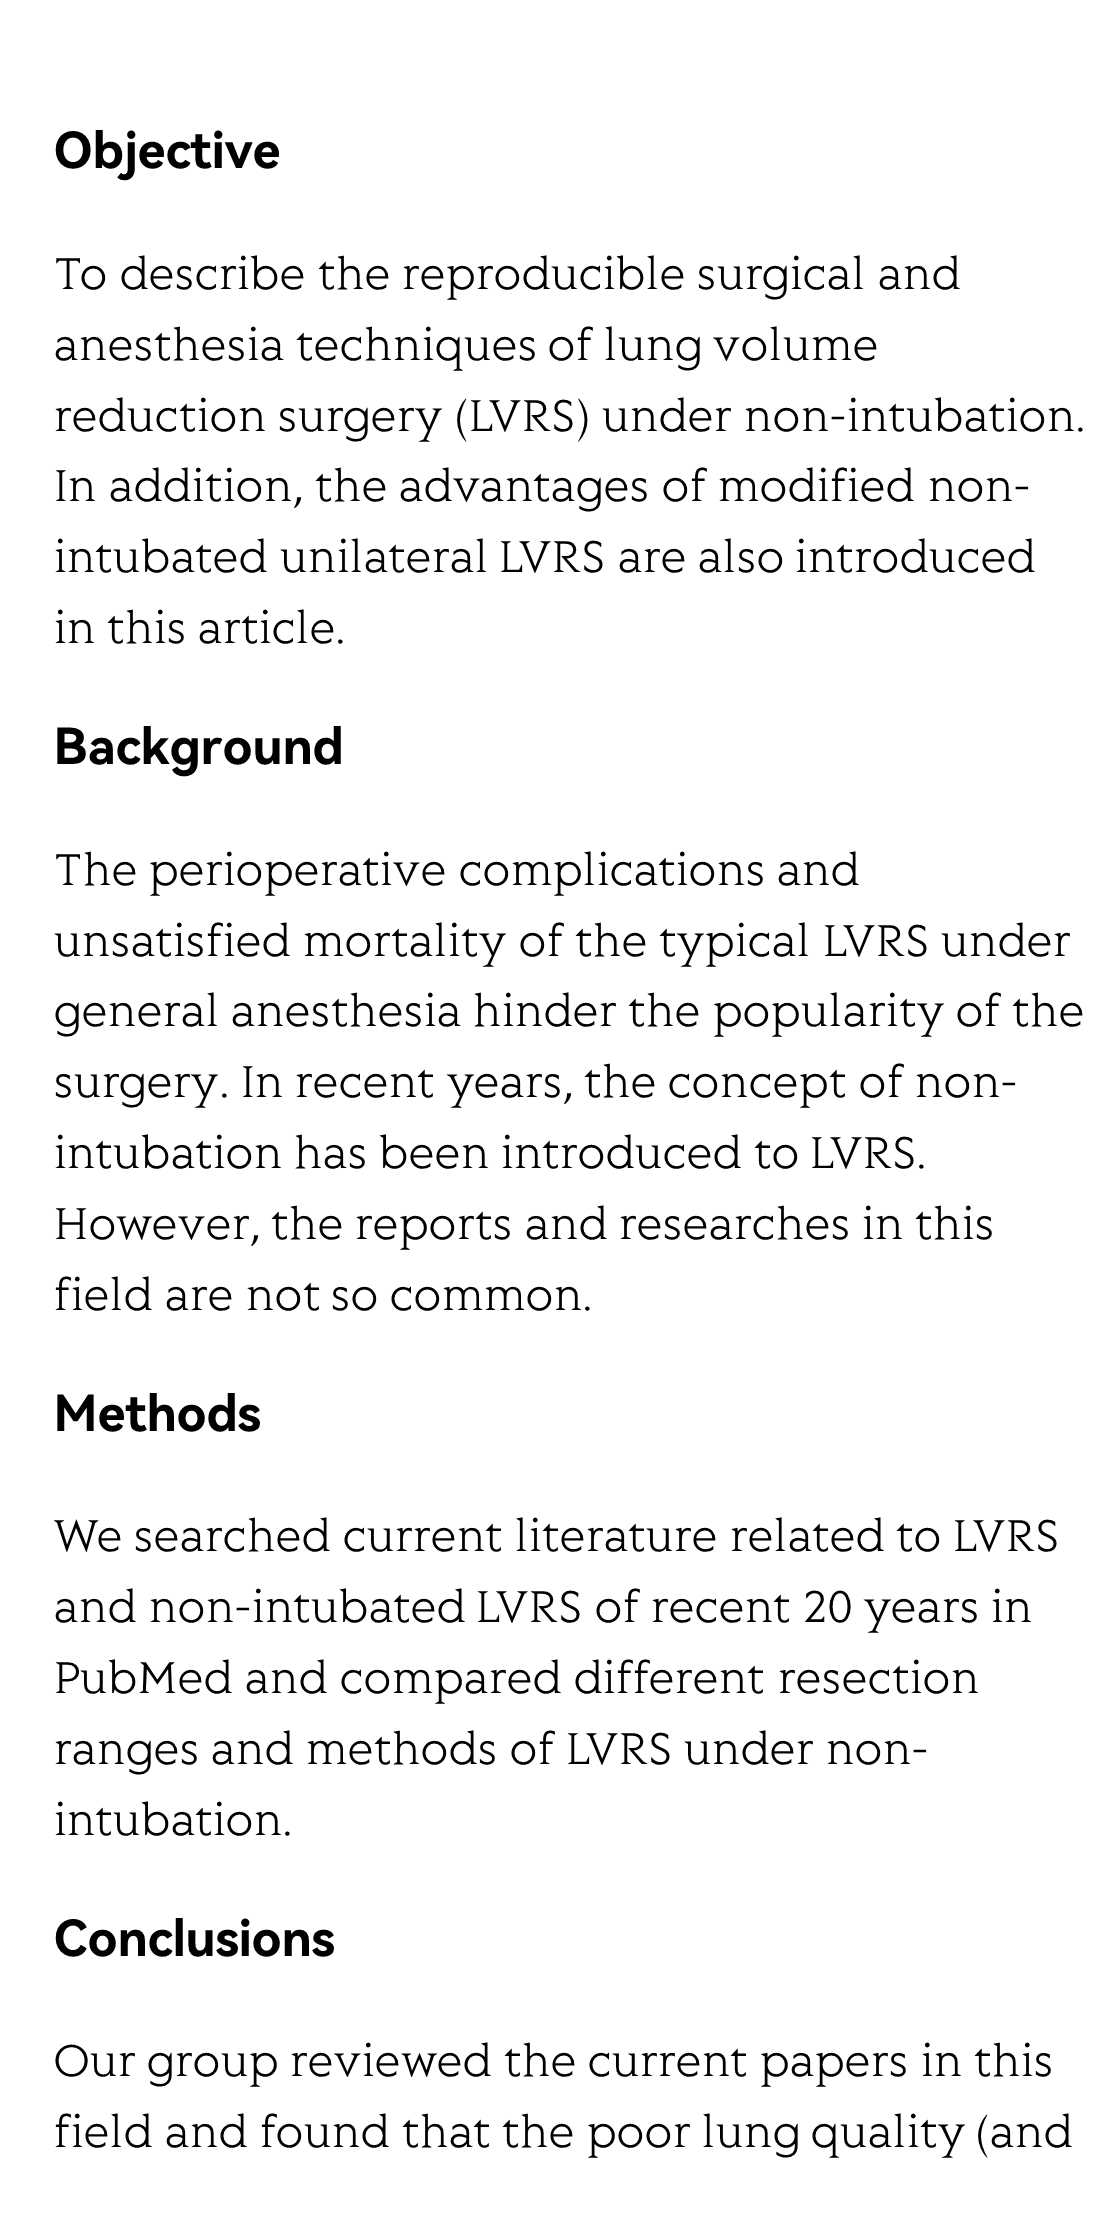 Literature review: non-intubated (tubeless) VATS for lung volume reduction surgery_2